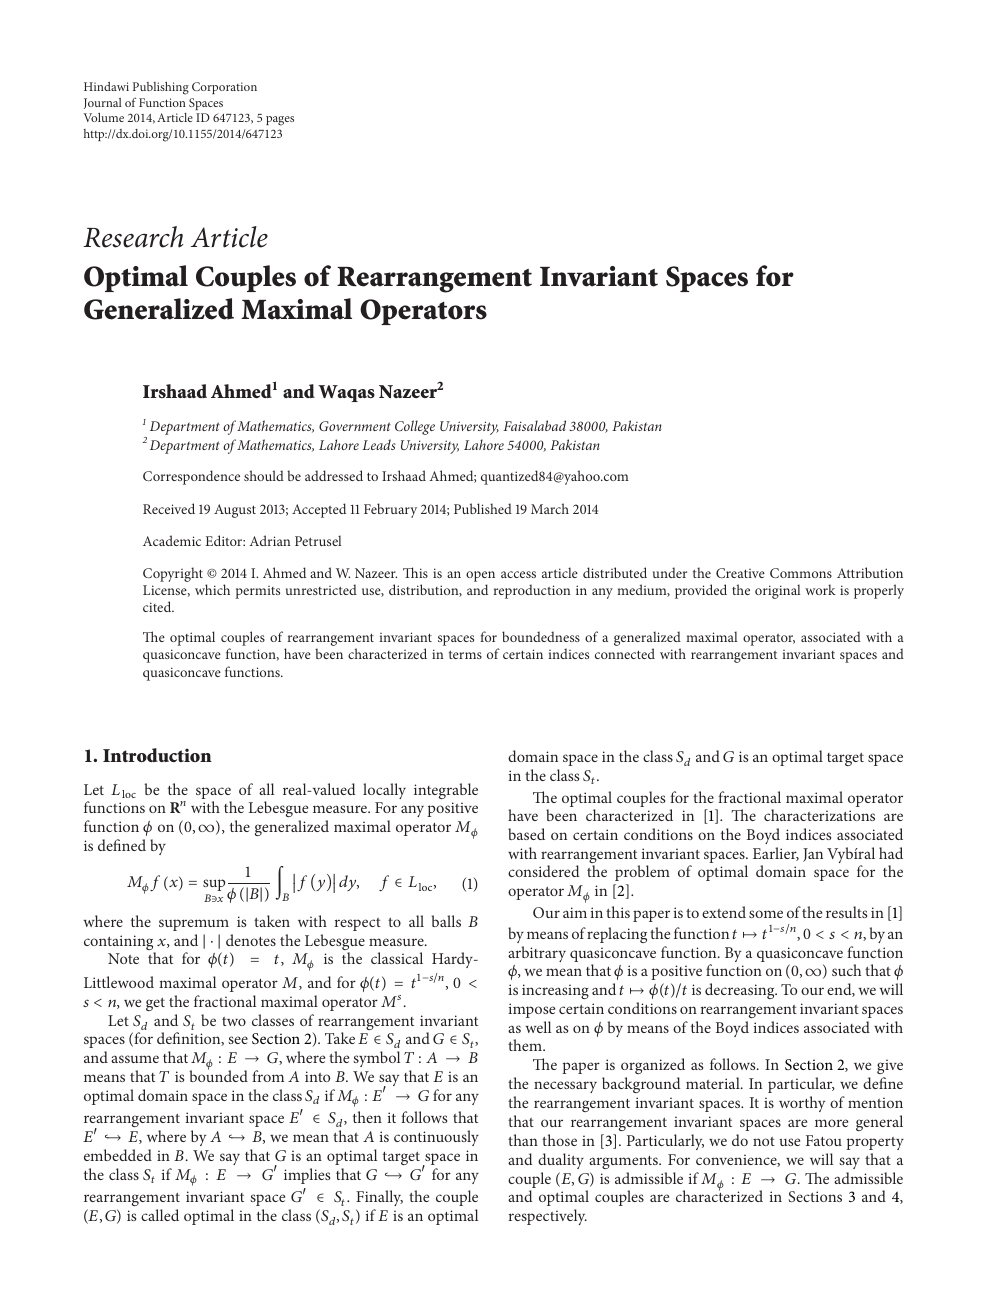 Optimal Couples Of Rearrangement Invariant Spaces For Generalized Maximal Operators Topic Of Research Paper In Mathematics Download Scholarly Article Pdf And Read For Free On Cyberleninka Open Science Hub